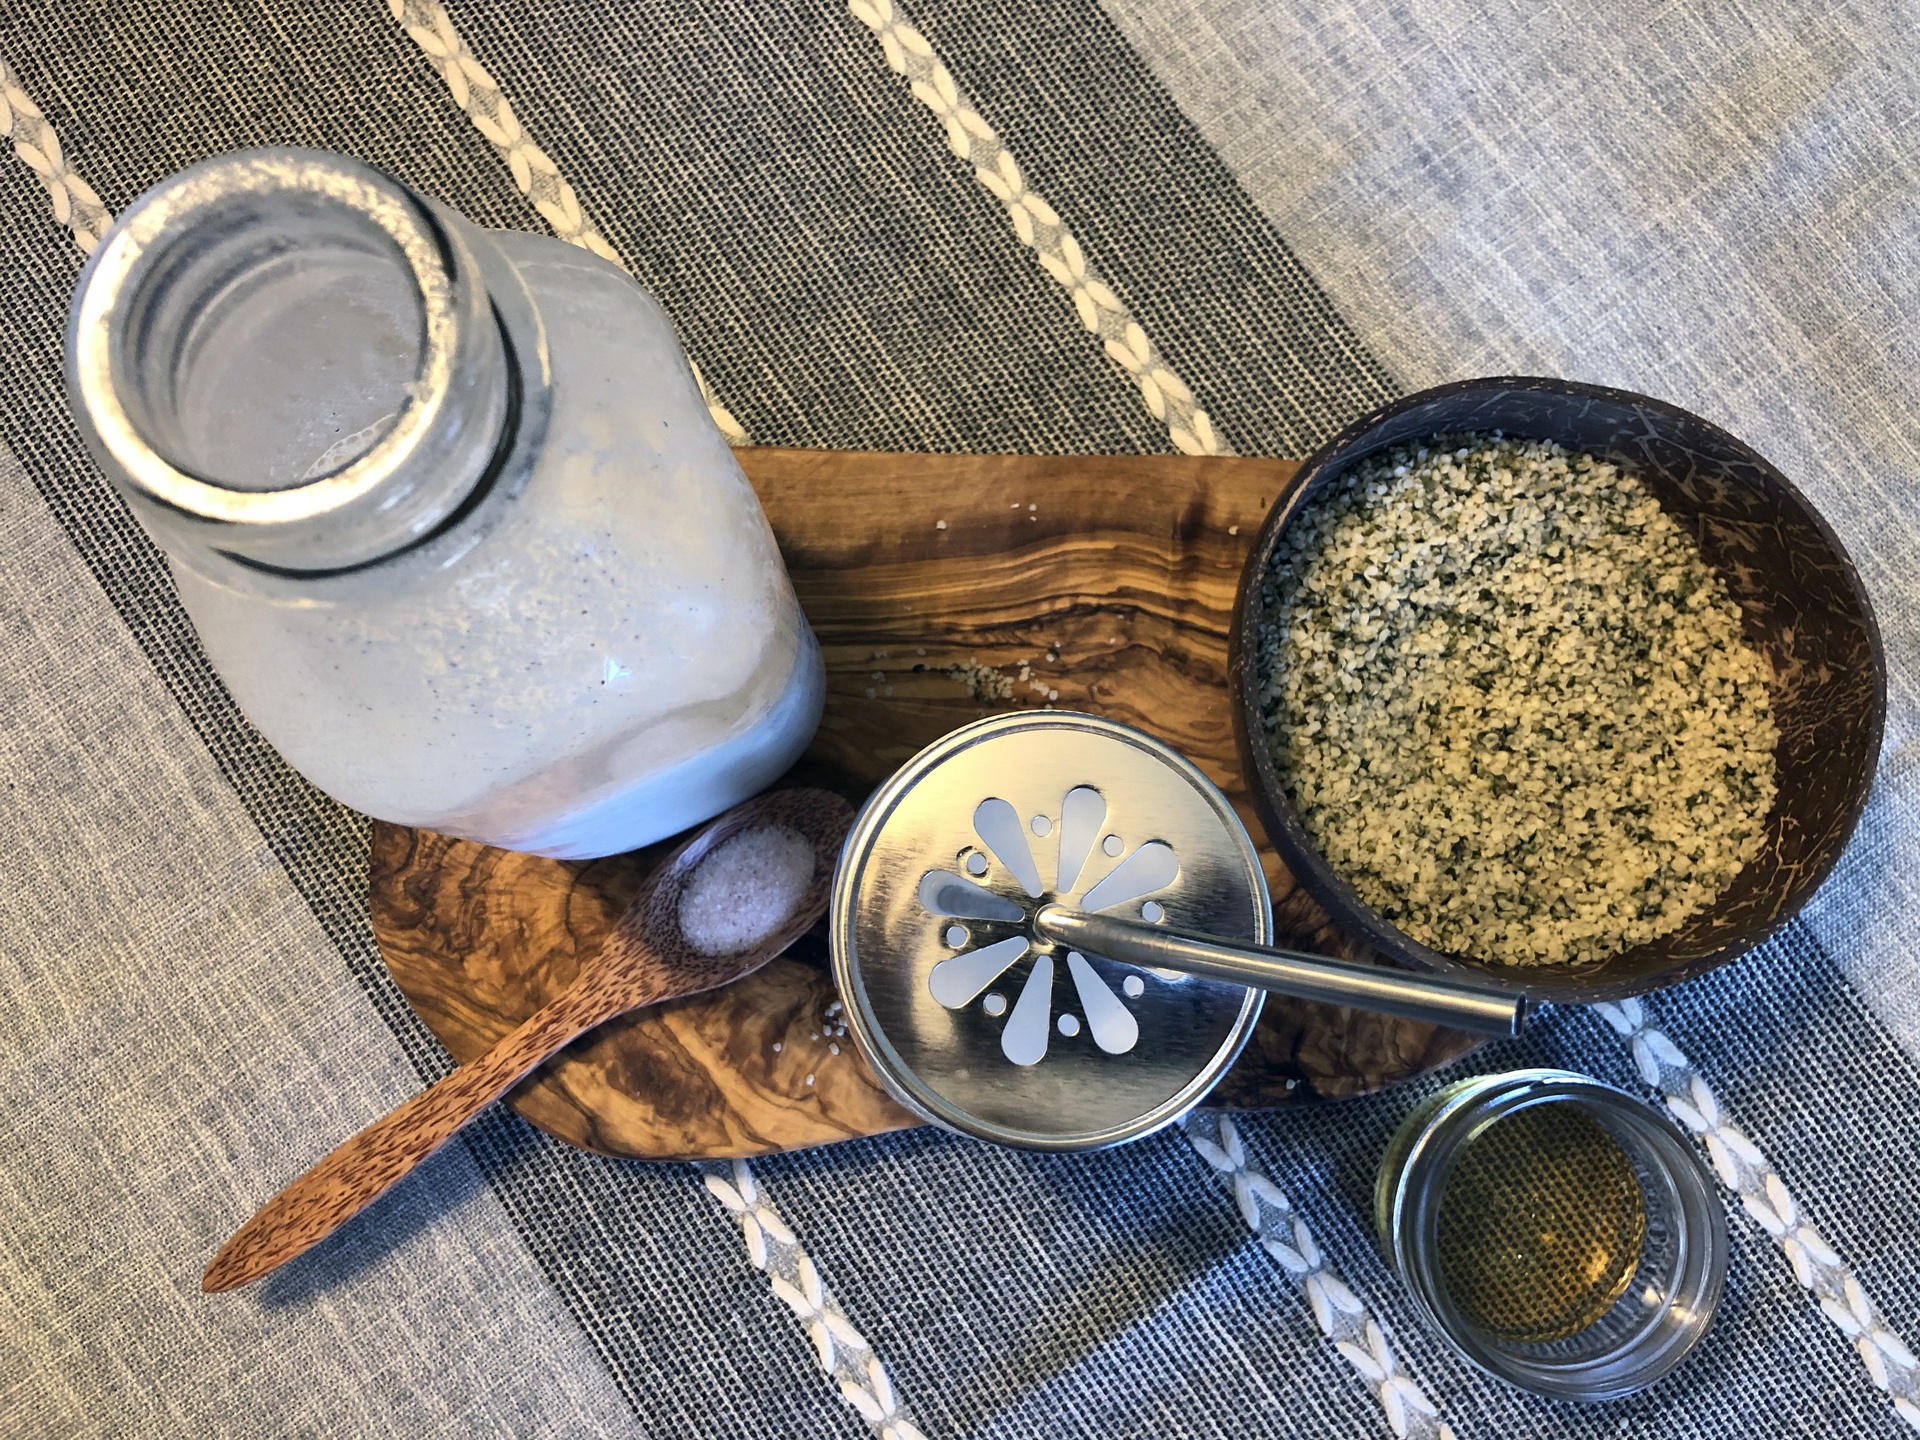 A jar of our DIY hemp milk sits near ingredients for making it, including hemp hearts and salt.